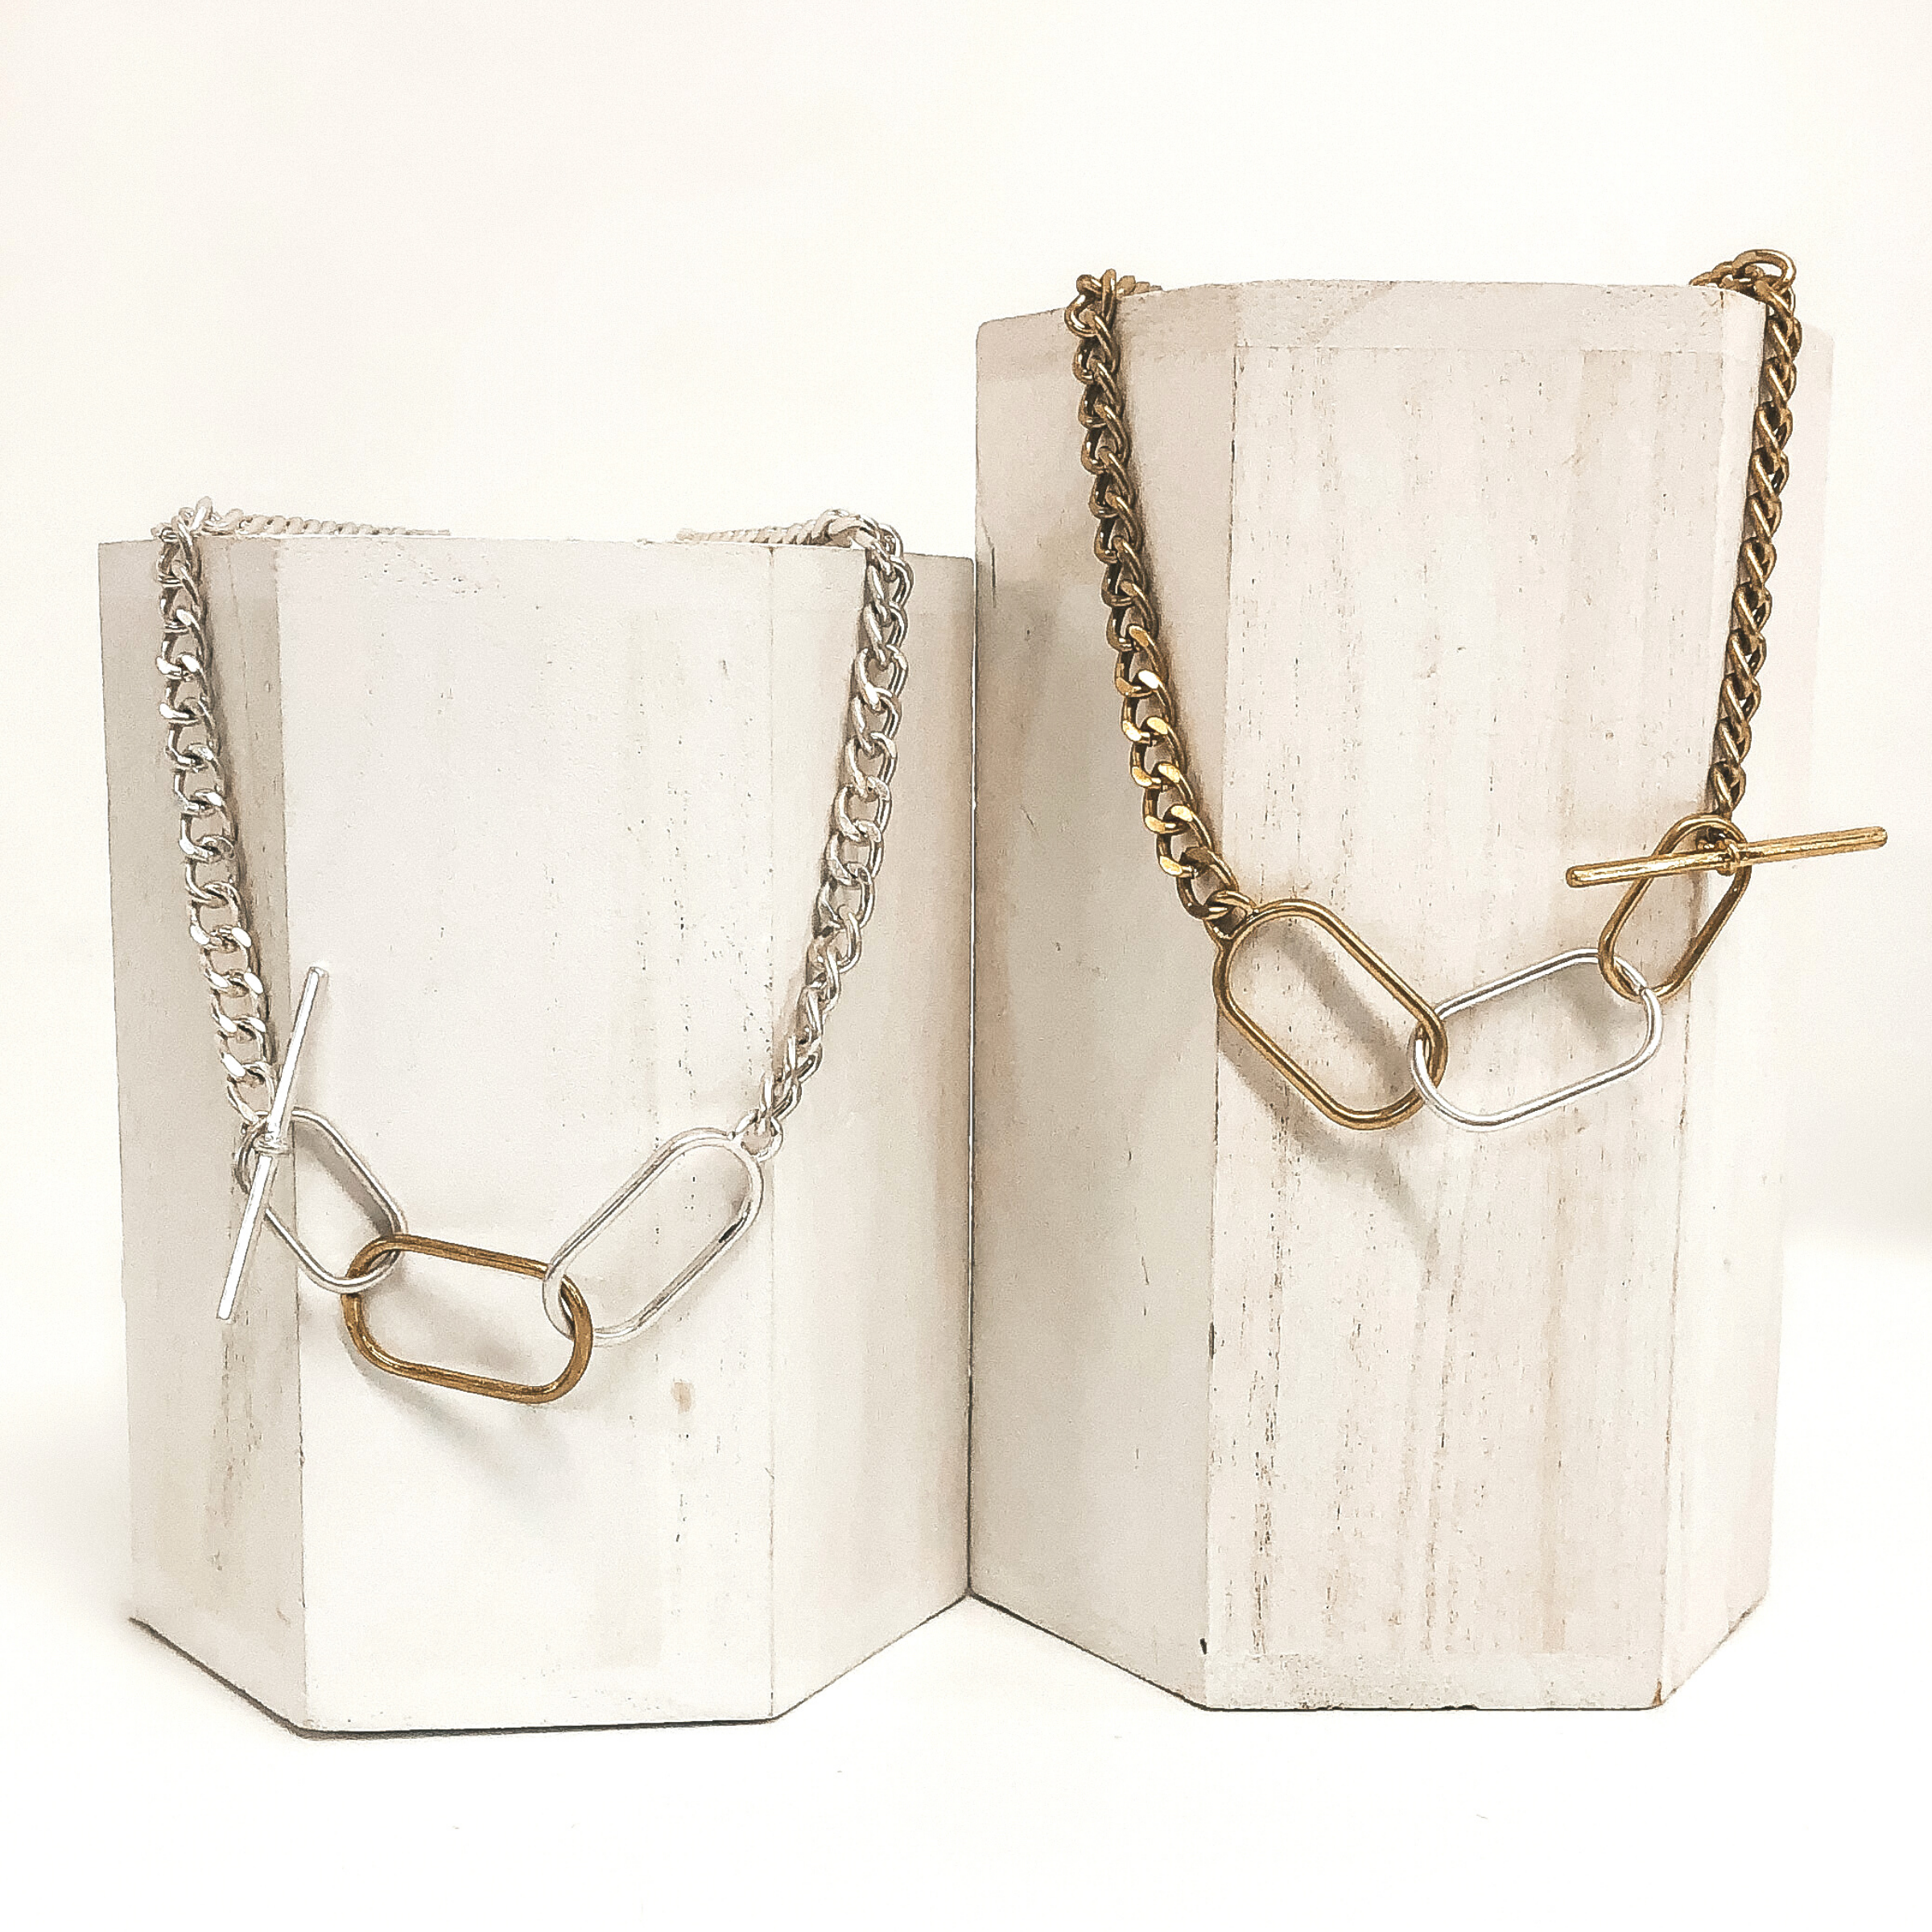 Chain Link Necklace with Toggle Clasp in Silver - Giddy Up Glamour Boutique